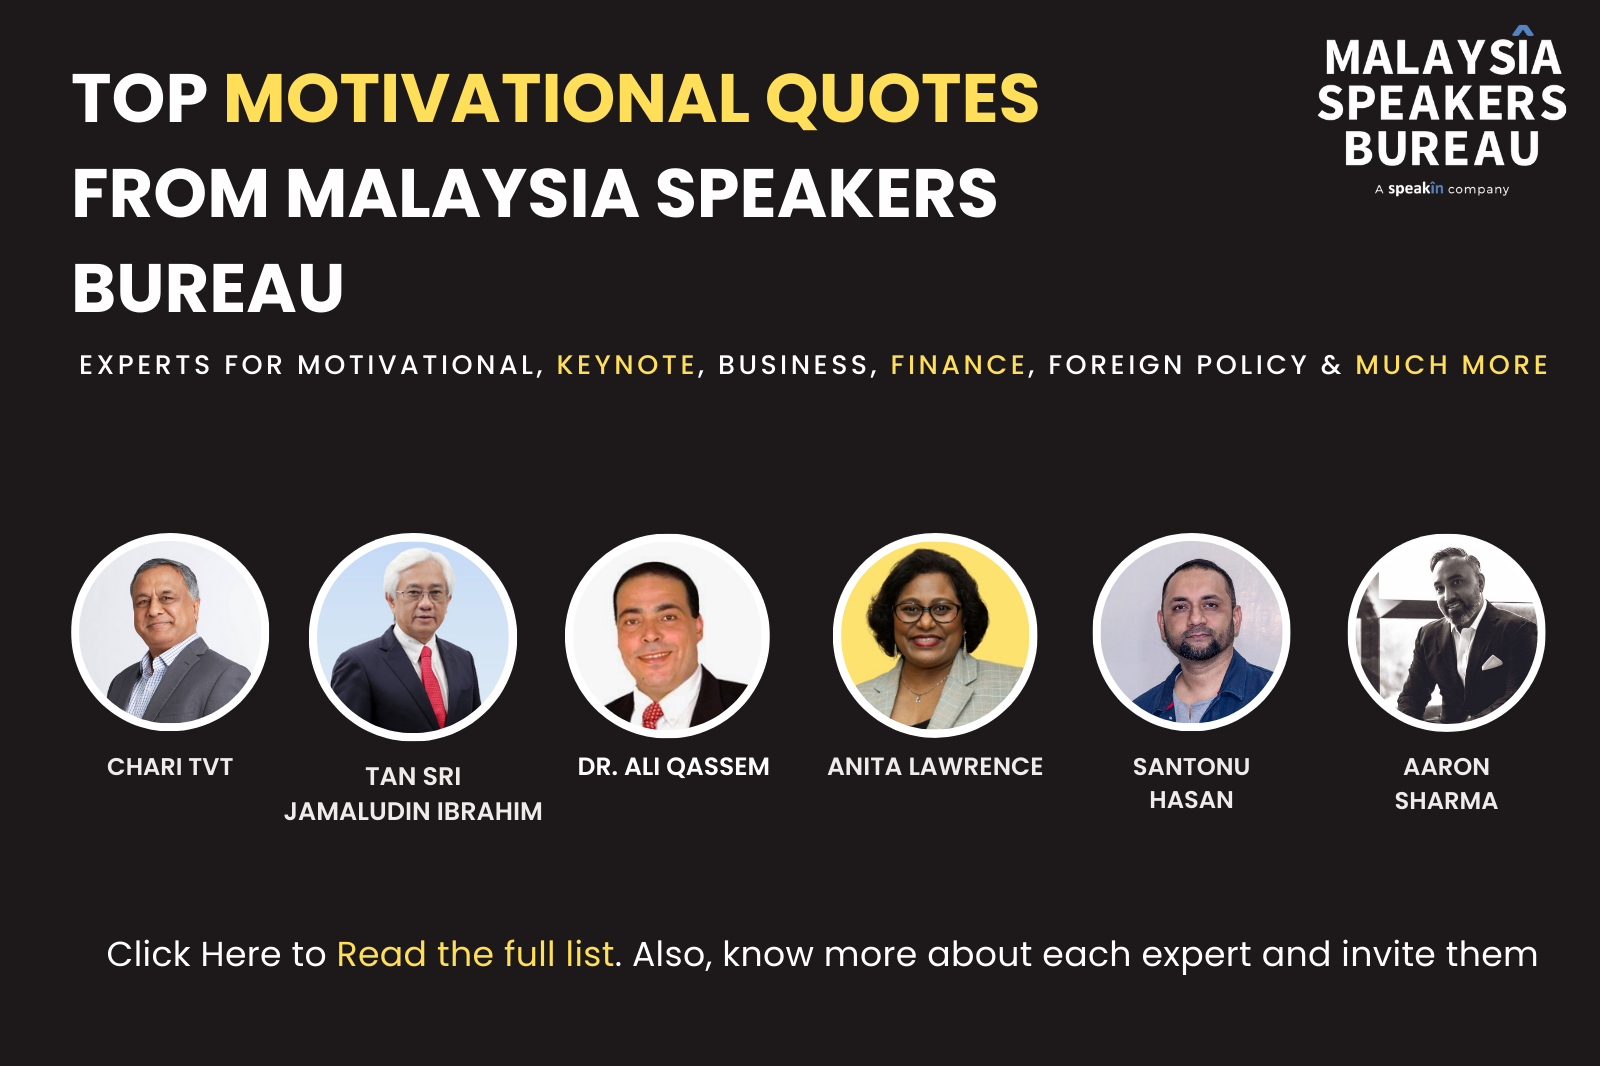 Top Motivational Quotes From Malaysian Speakers Bureau for Success